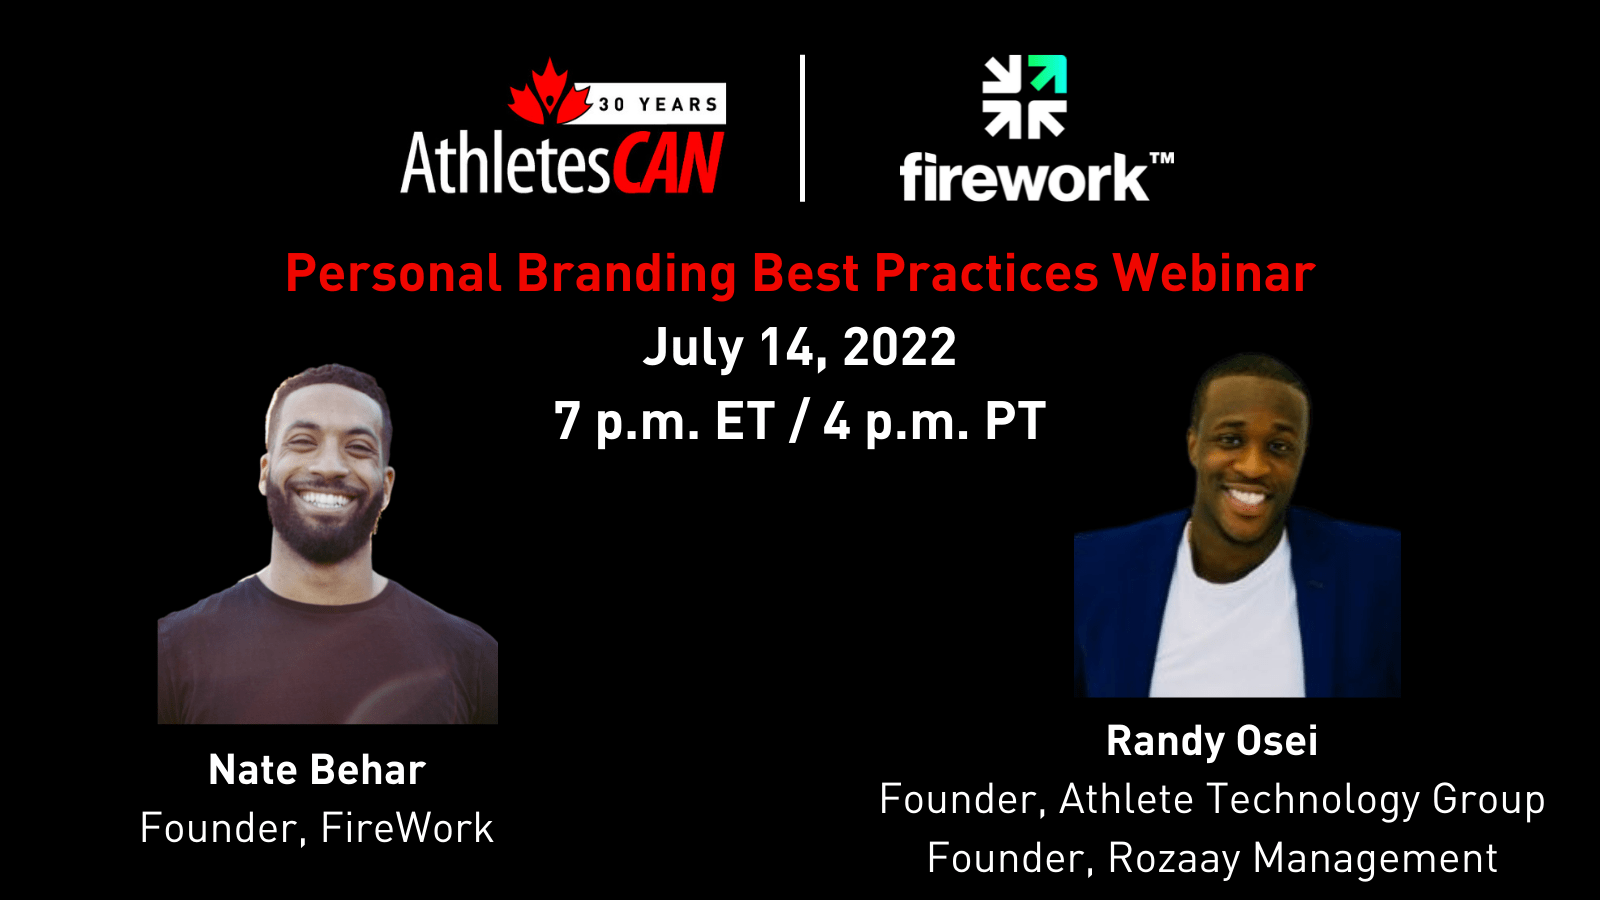 AthletesCAN and FireWork to host personal branding best practices webinar for members July 14